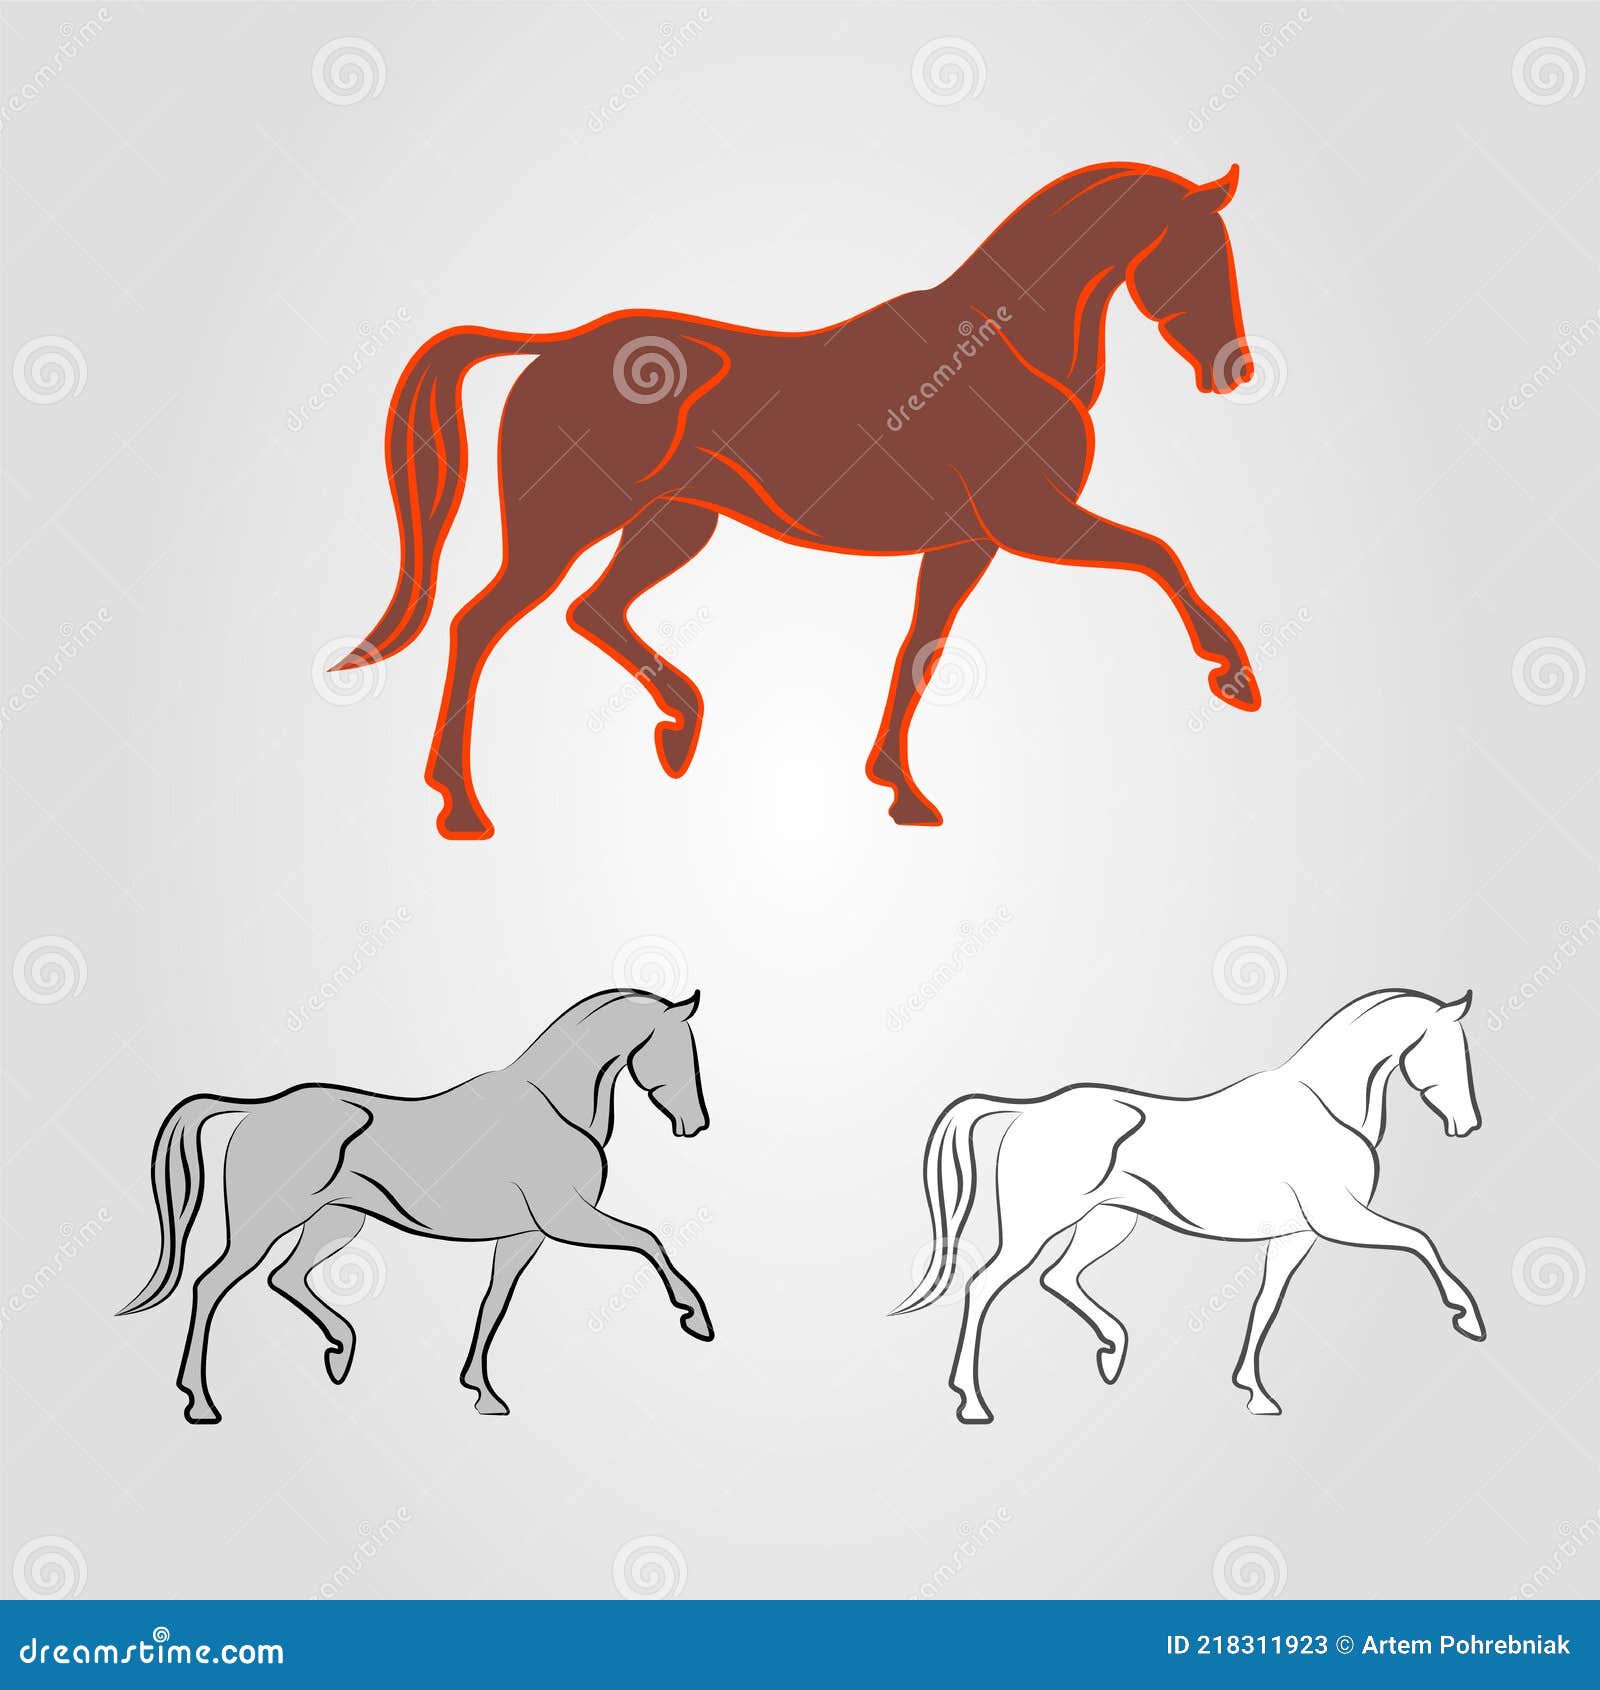 horse logo. mustang mascot. perfect stallion. calm pony. noble steed icon. race animal.  